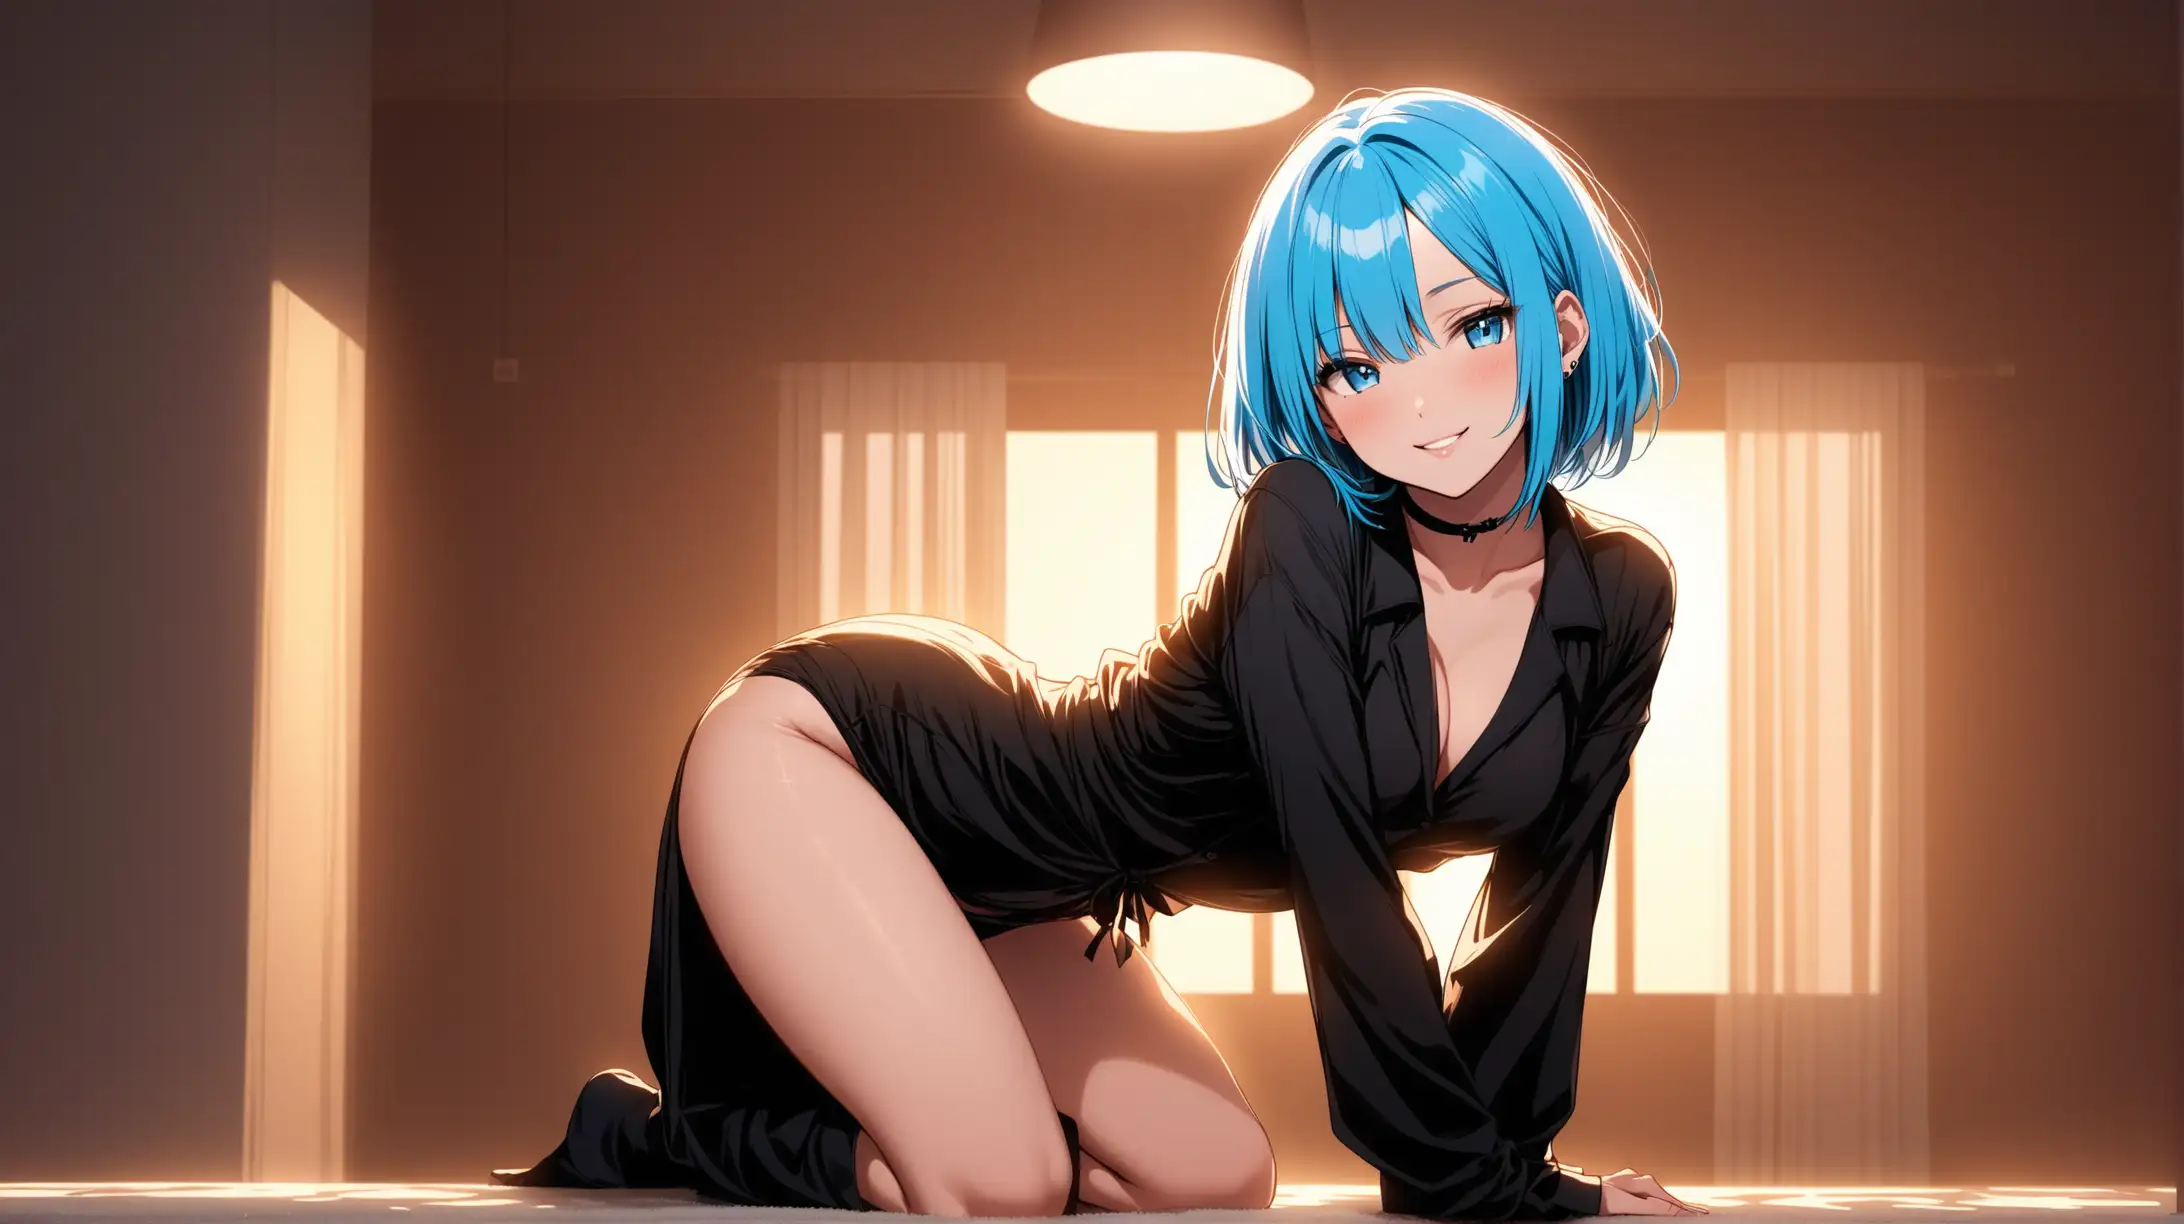 Draw the character Rem, high quality, indoors, ambient lighting, long shot, in a seductive pose, wearing trendy fashion clothing, smiling at the viewer